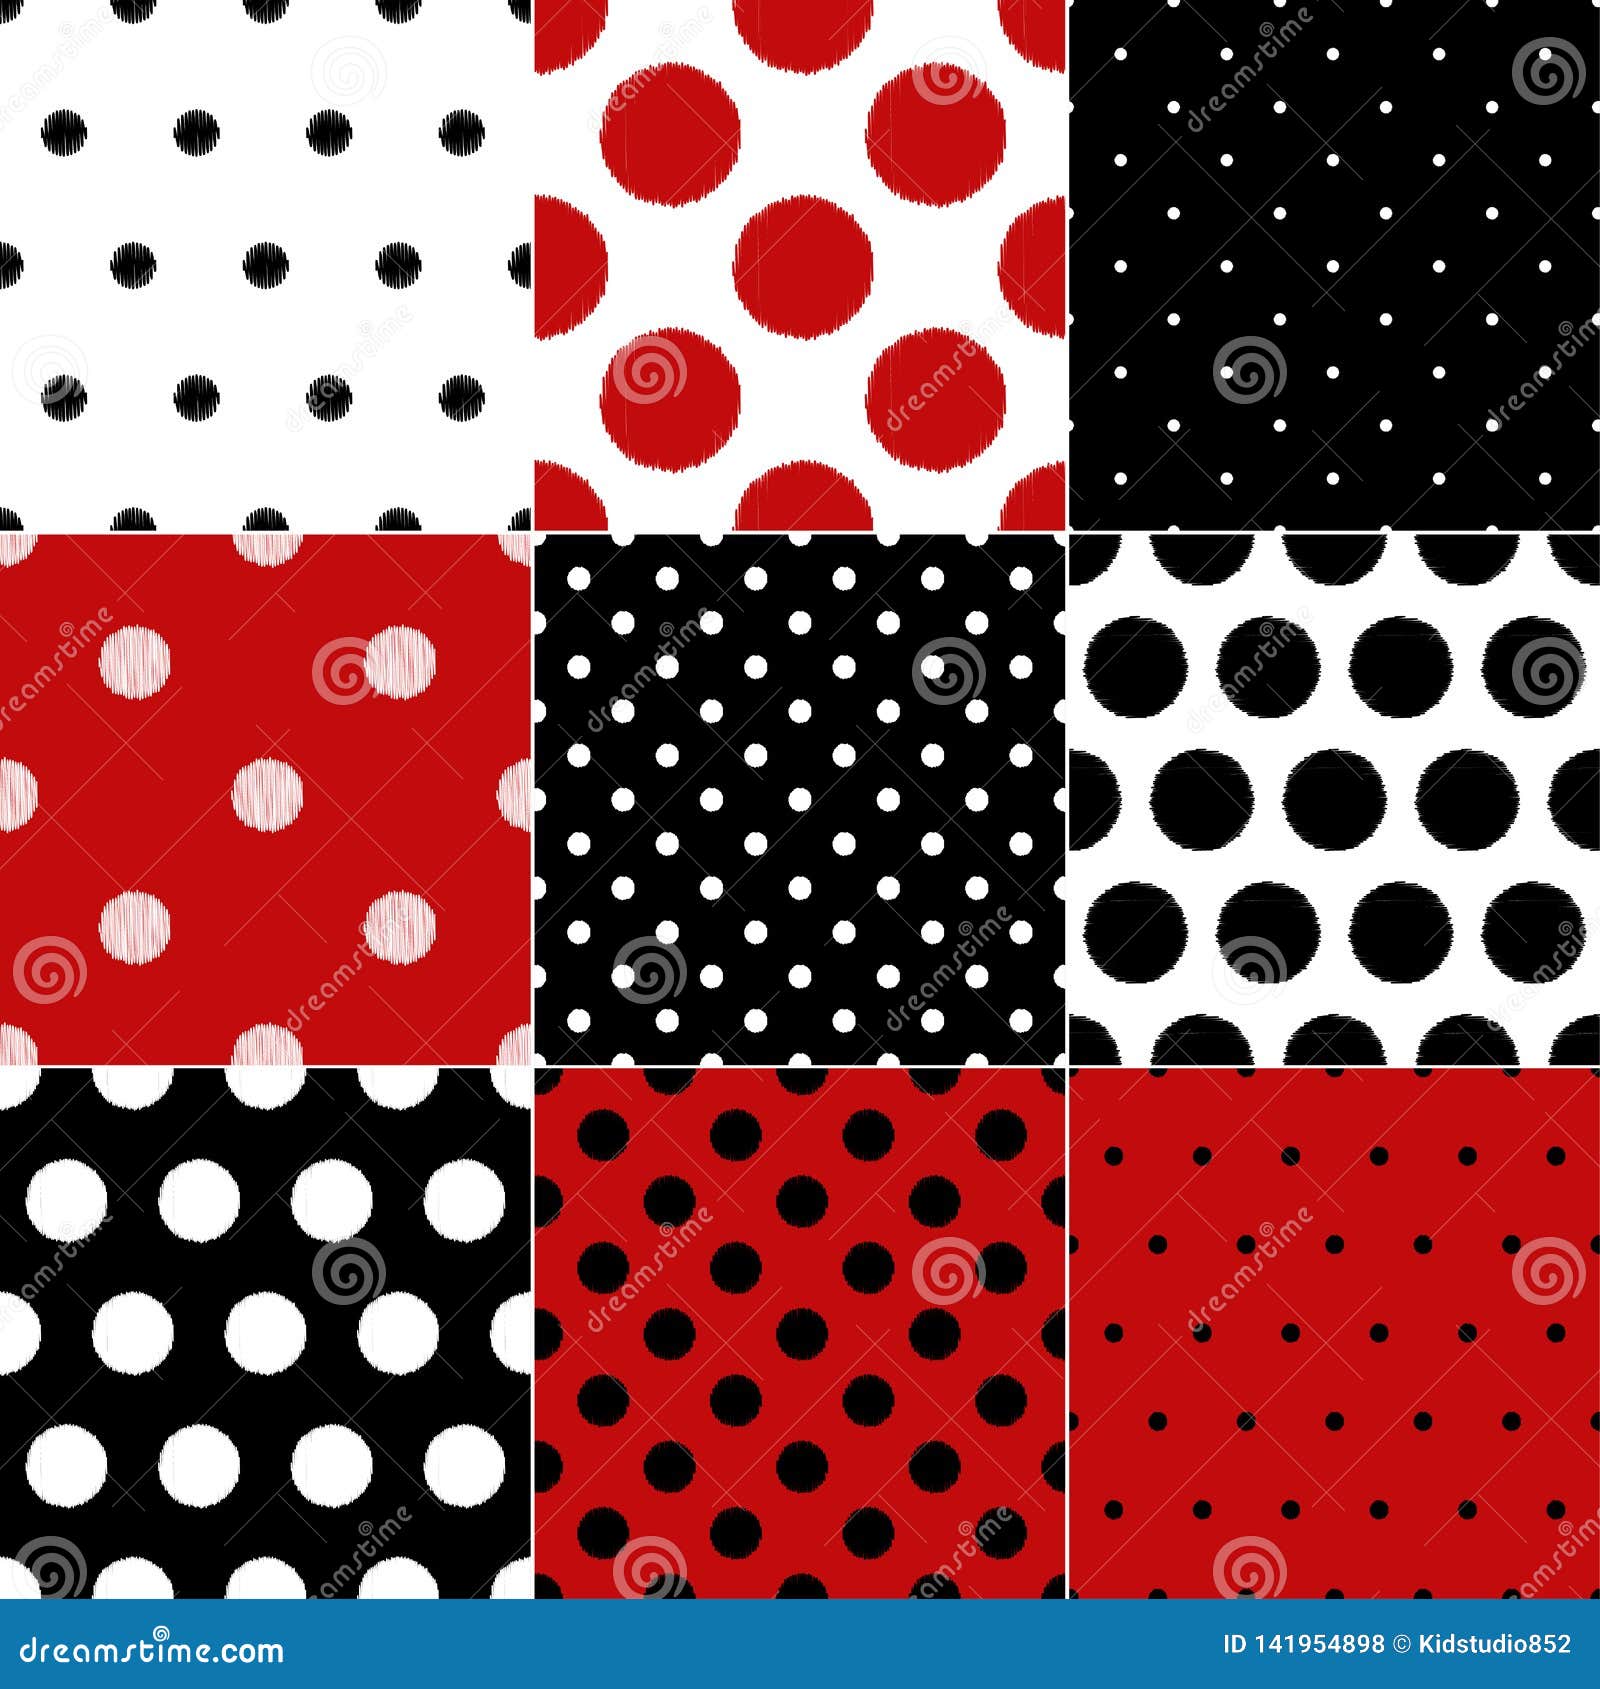 Seamless Red and Black Polka Dots Textile Background Pattern Design Stock  Vector - Illustration of damask, decoration: 141954898